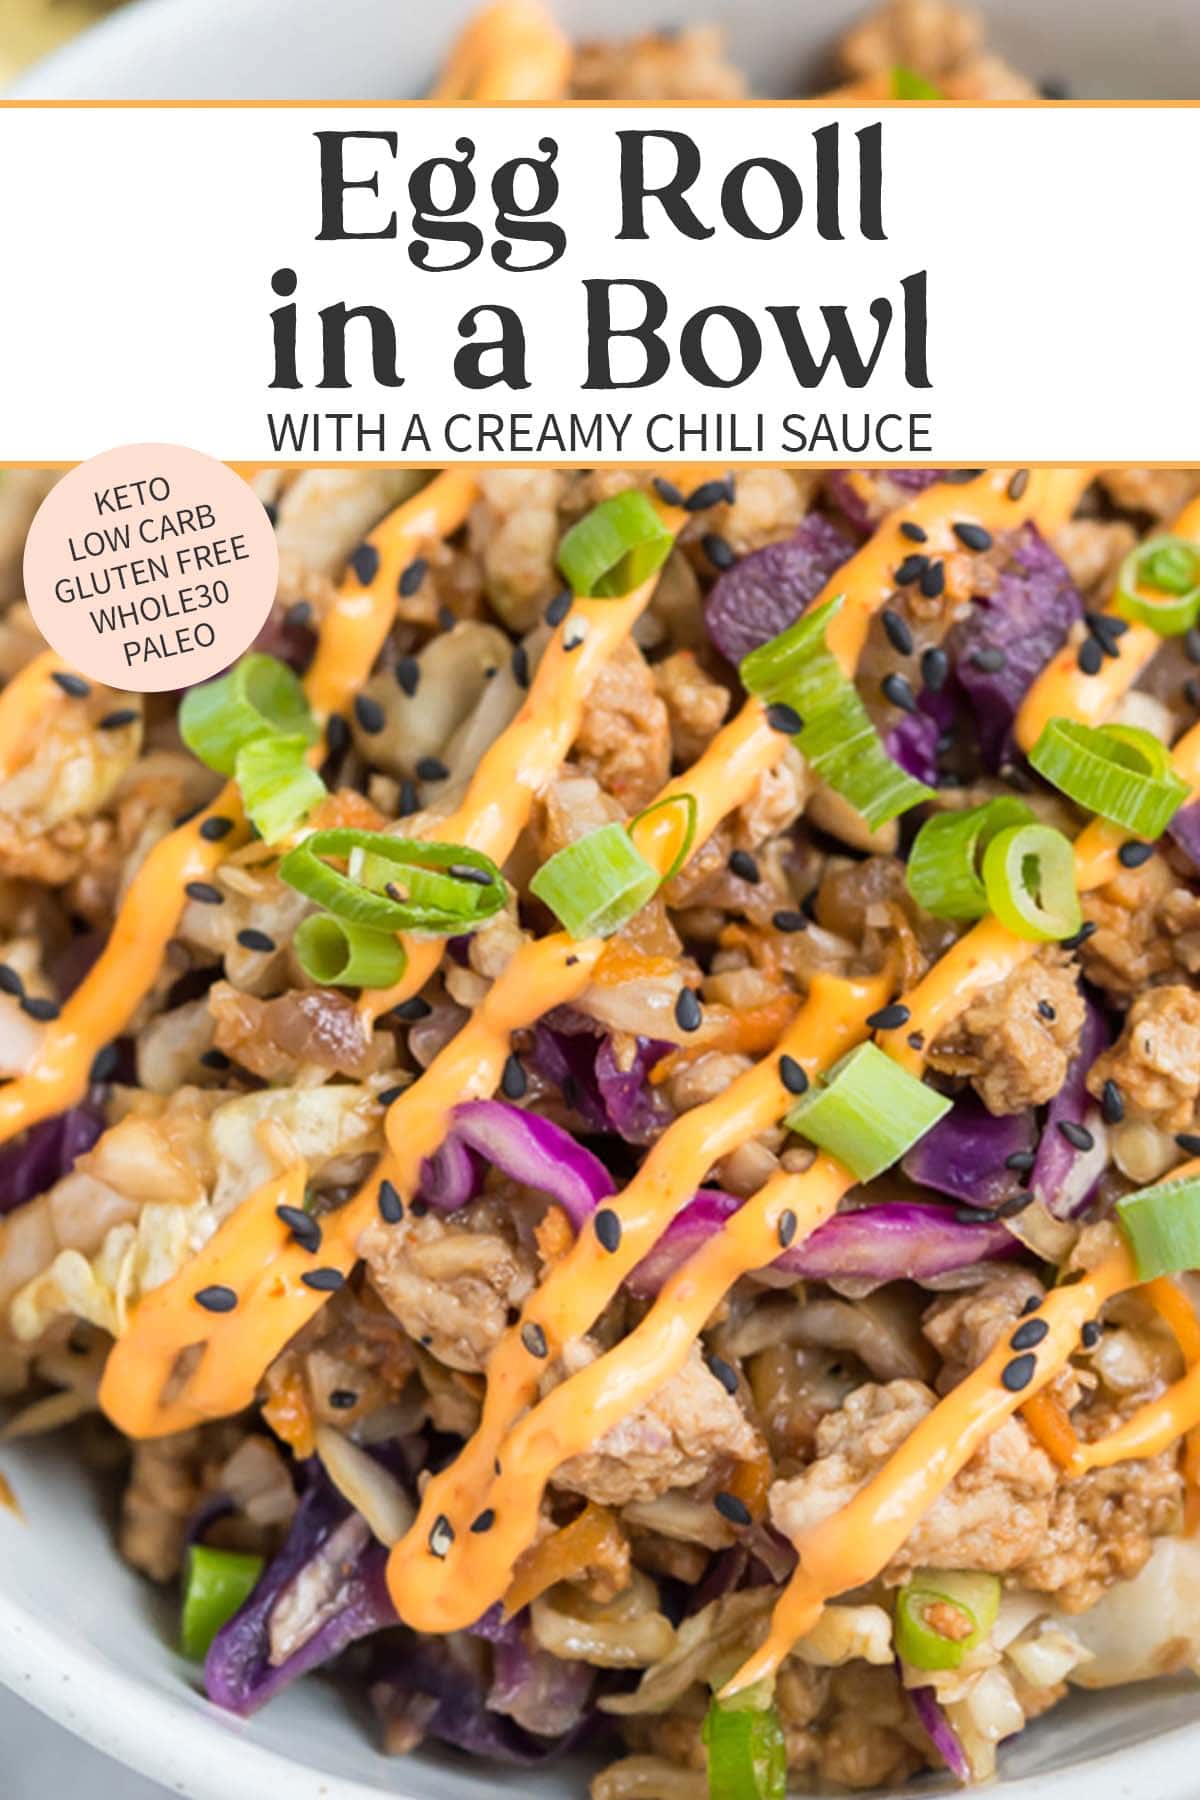 Pin graphic for egg roll in a bowl.